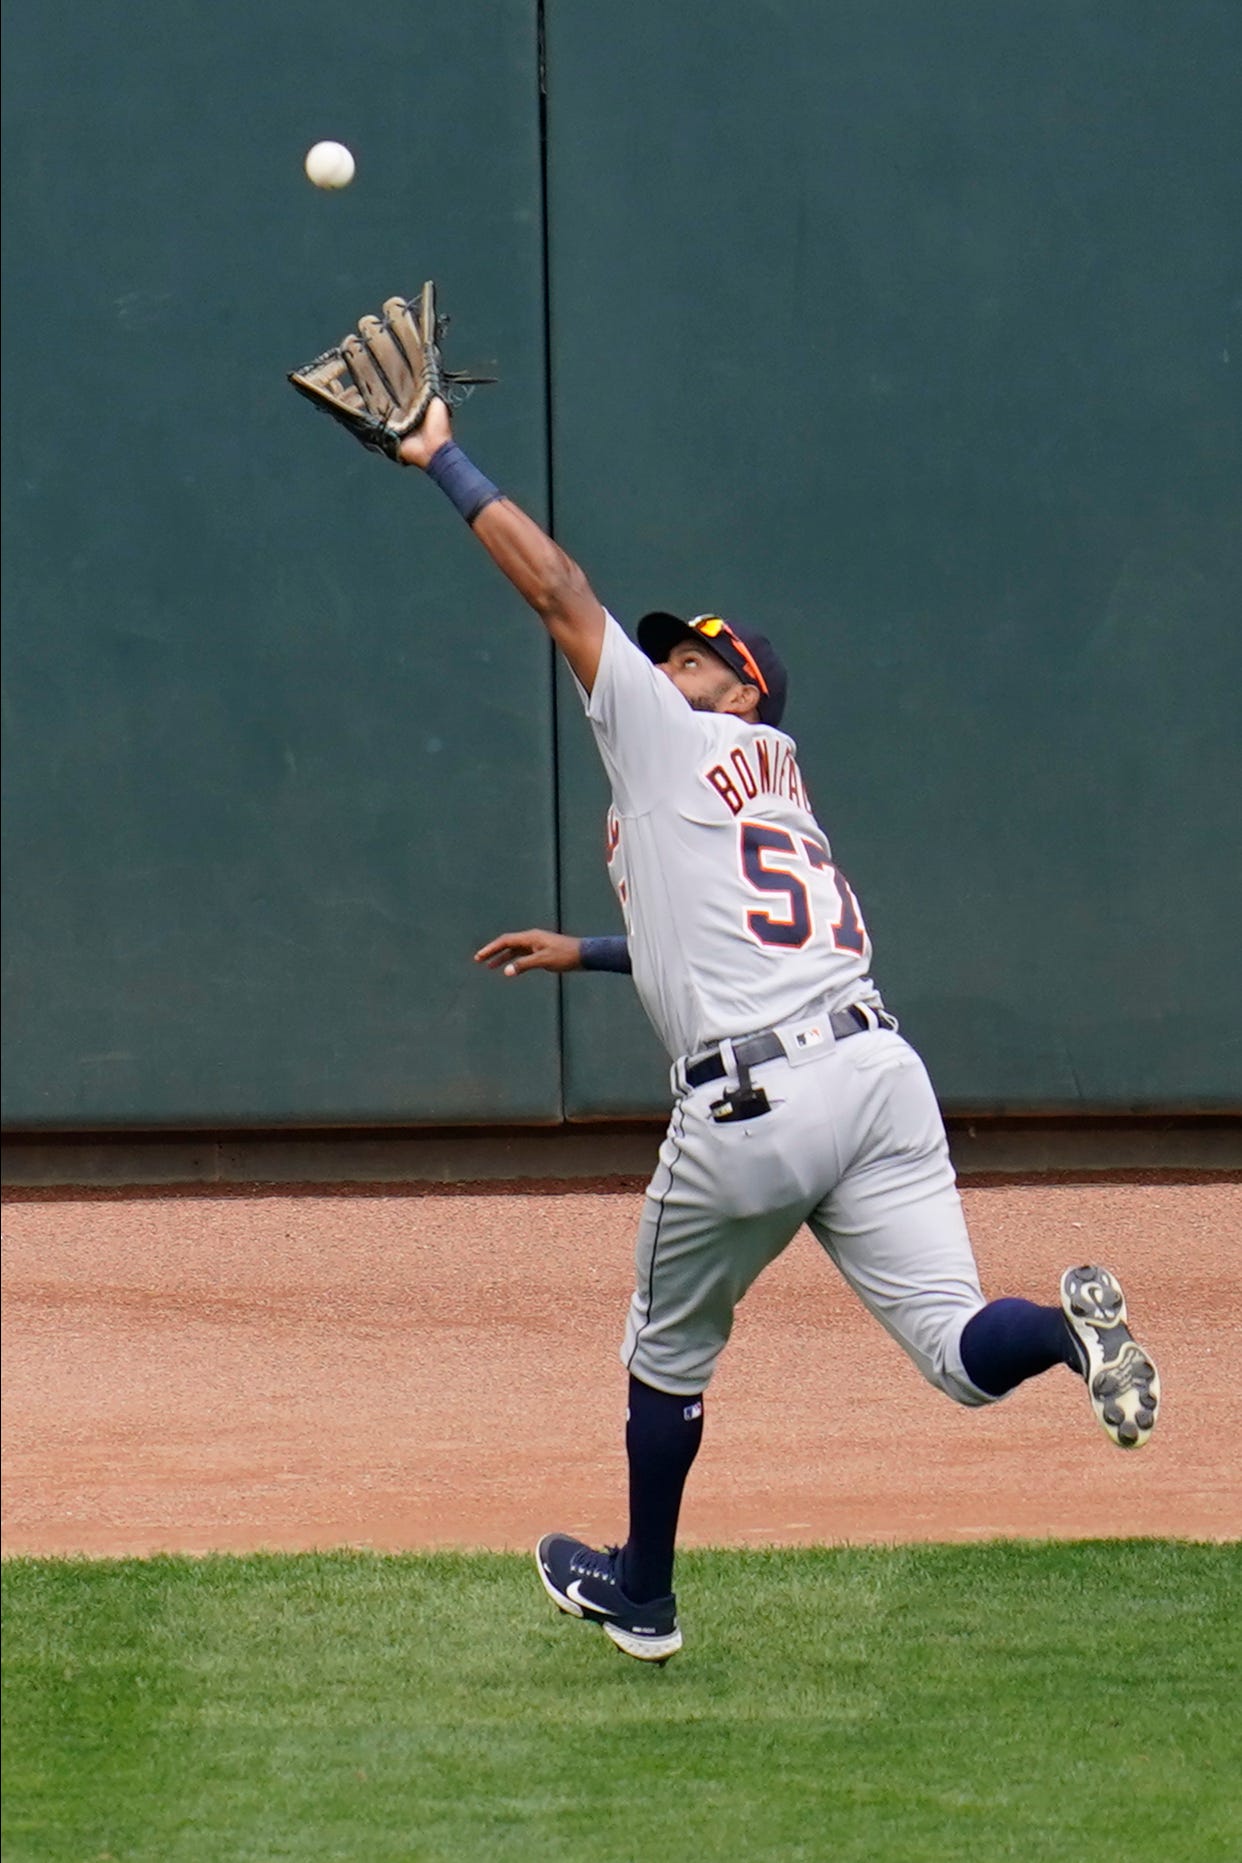 Detroit Tigers left fielder Jorge Bonafacio reaches and catches a fly ball off the bat of Minnesota Twins ' Luis Arraez in the first inning.